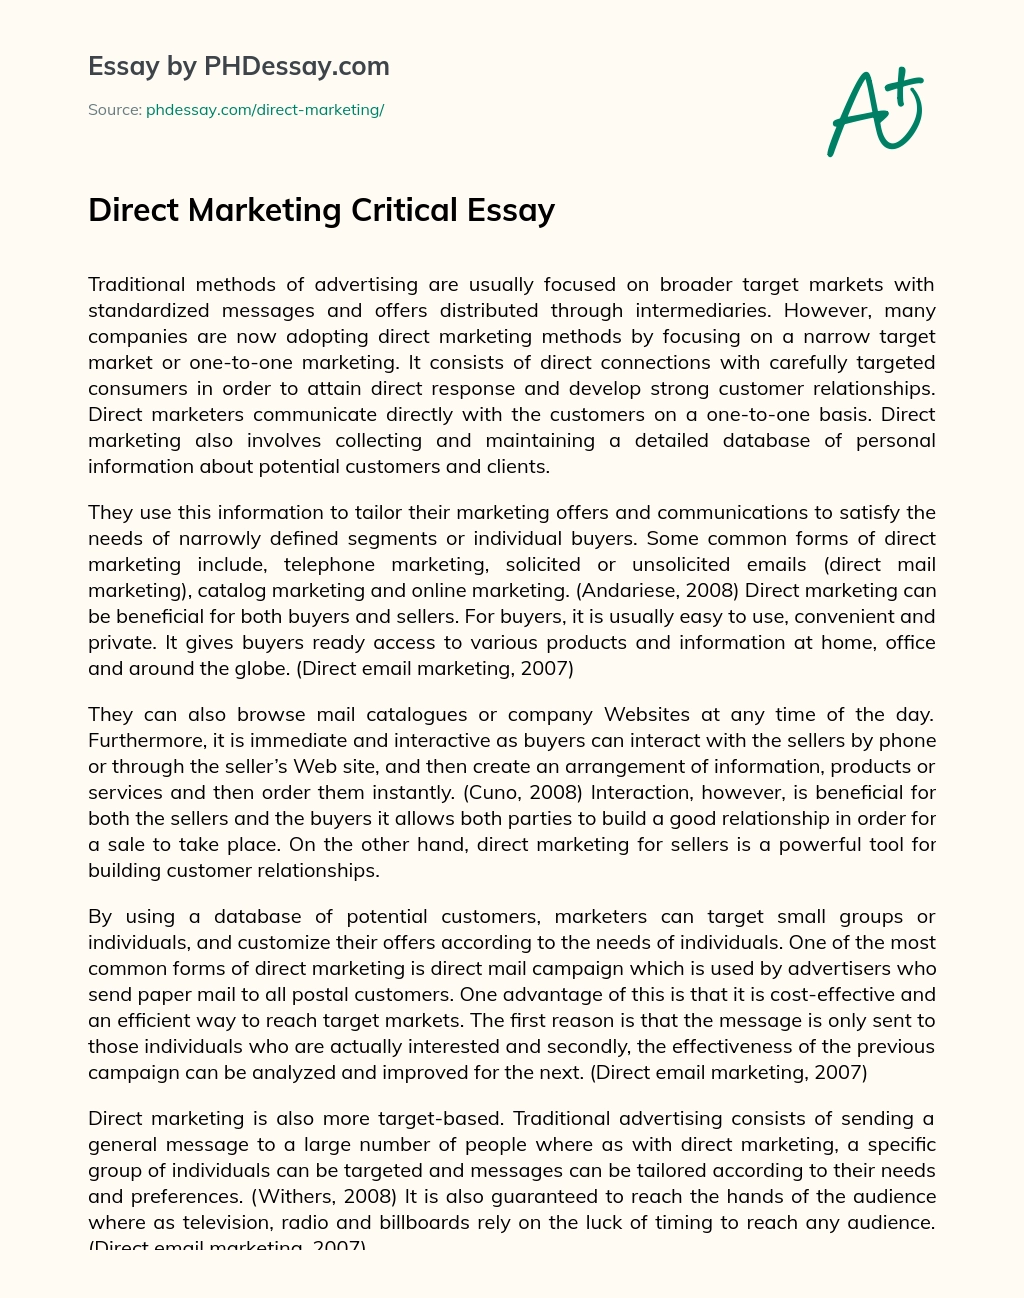 Реферат: Direct Mail Marketing Essay Research Paper DirectMail